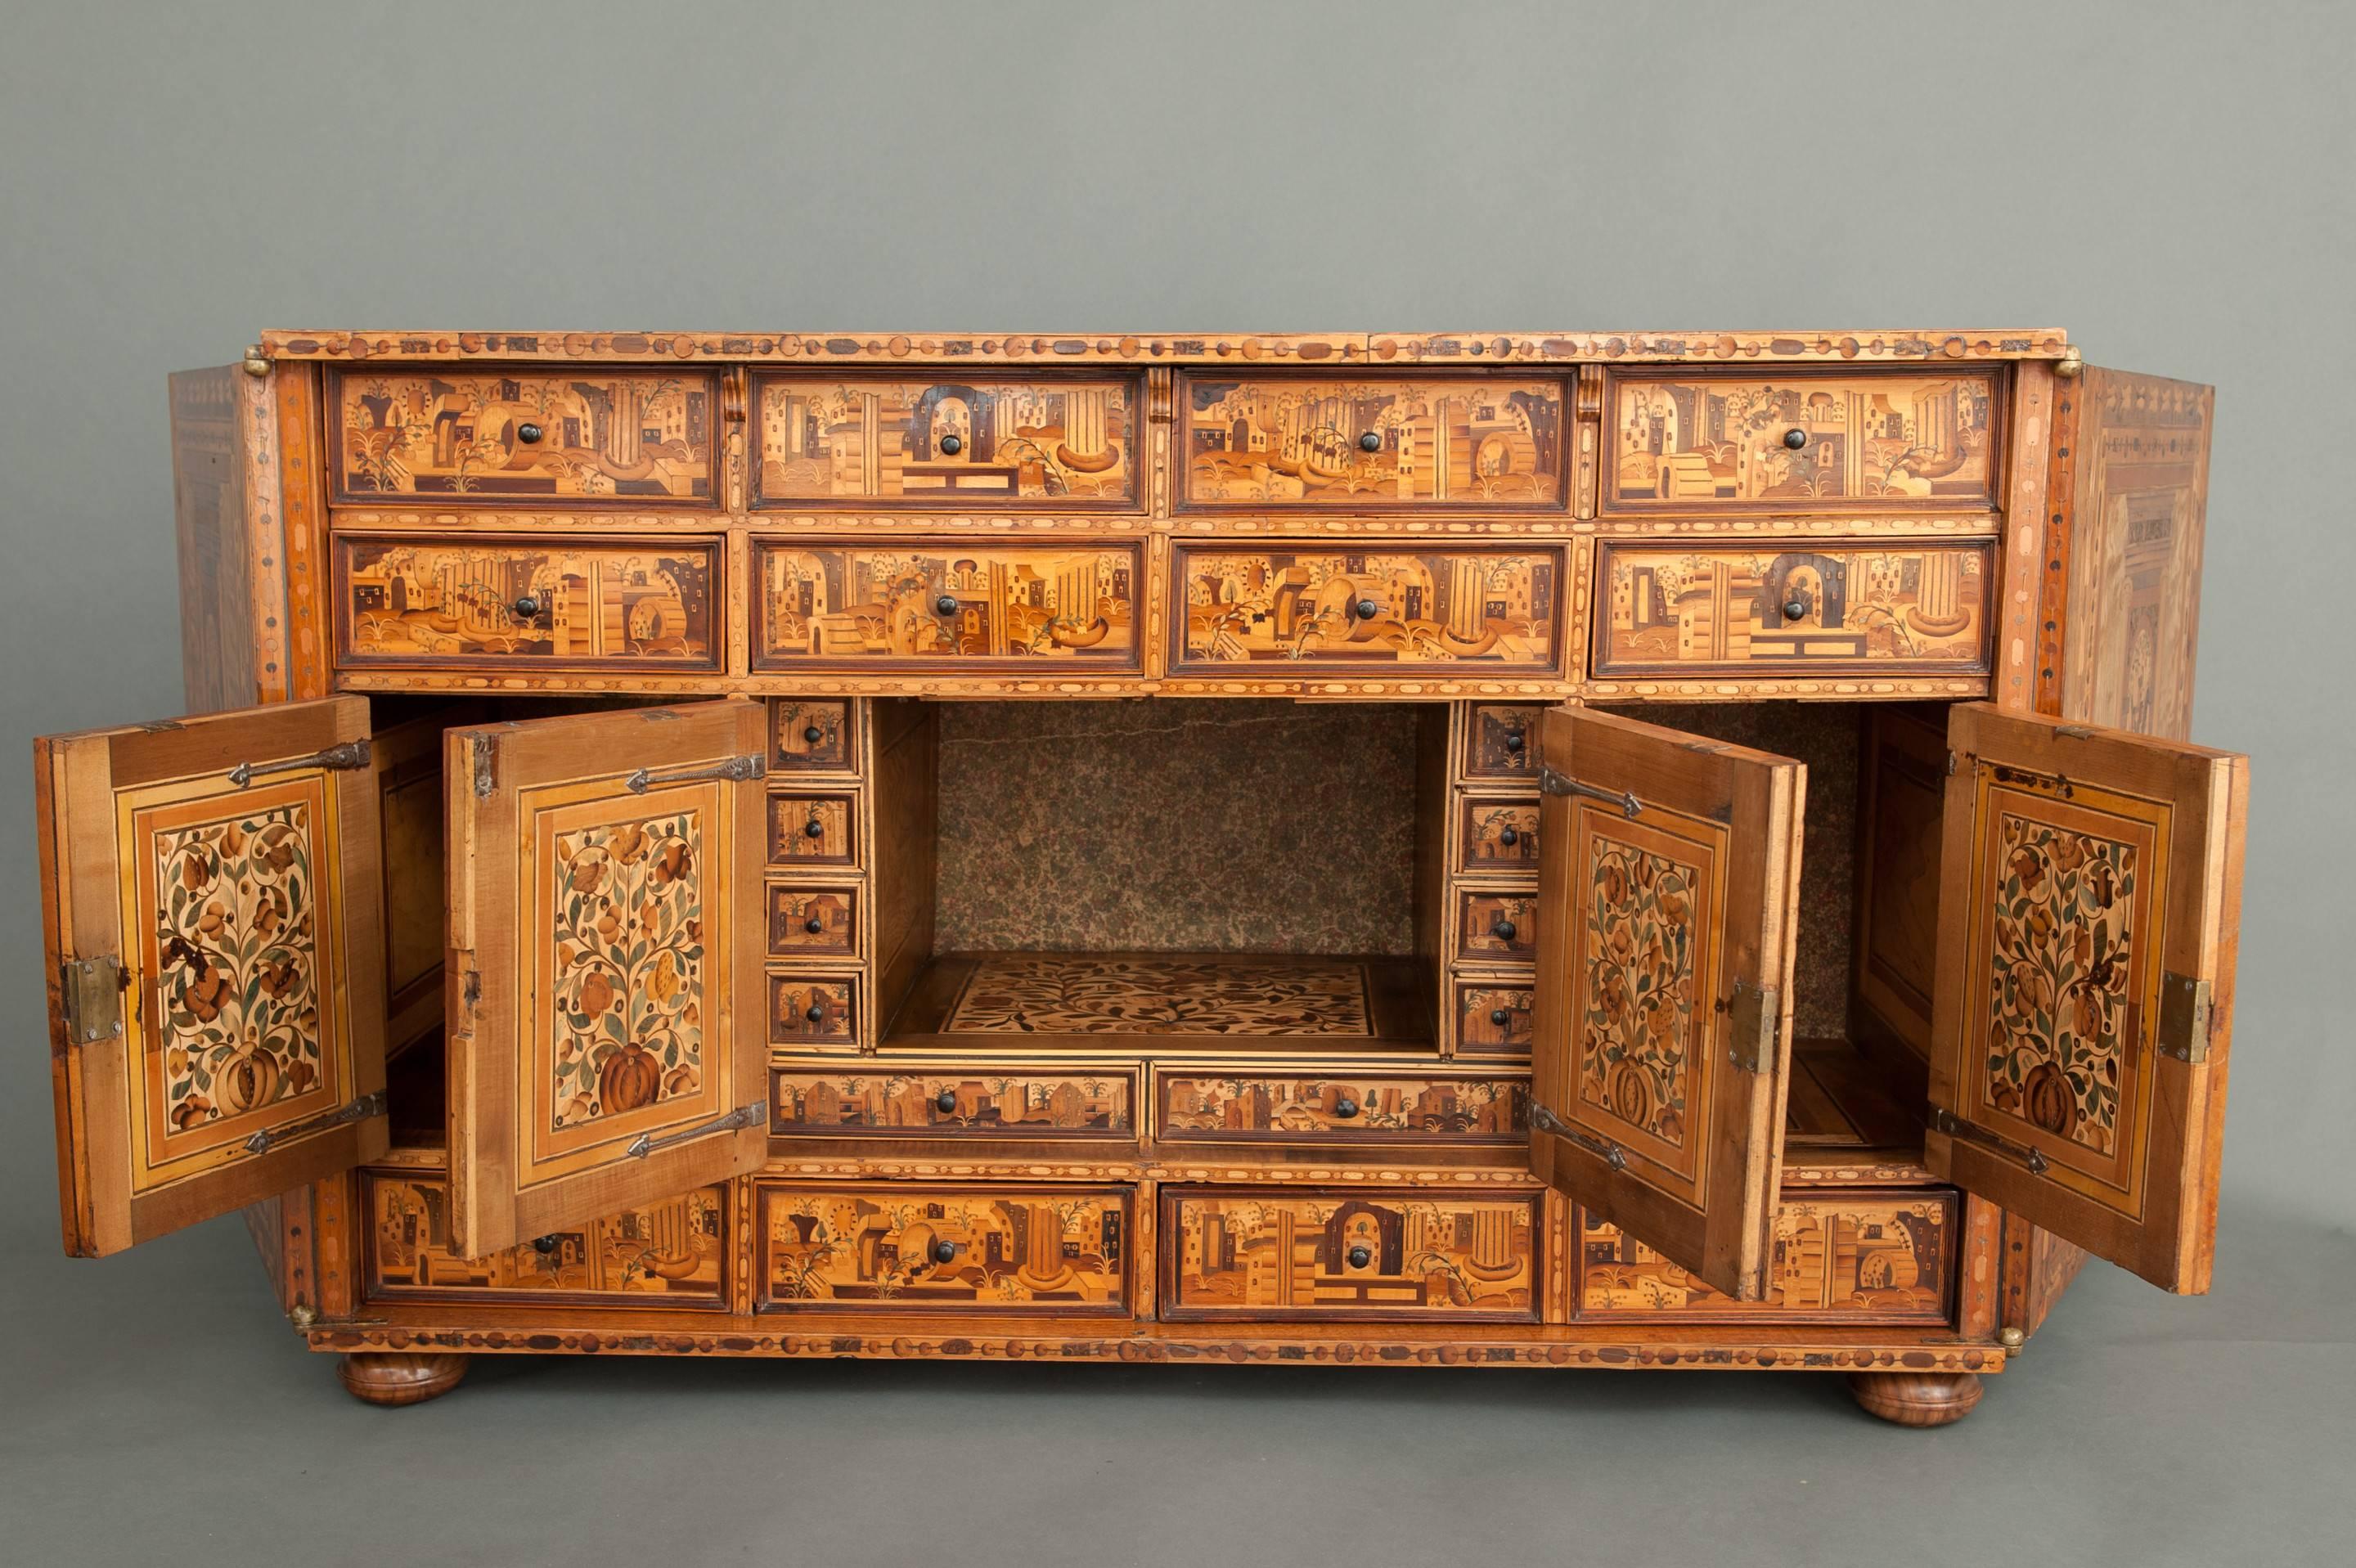 A superb example of an Augsburg Hungarian ash marquetry two door table cabinet. The whole inlaid with architectural views with columns and landscapes, the two doors open to reveal a fully fitted interior again all beautifully inlaid. To the interior